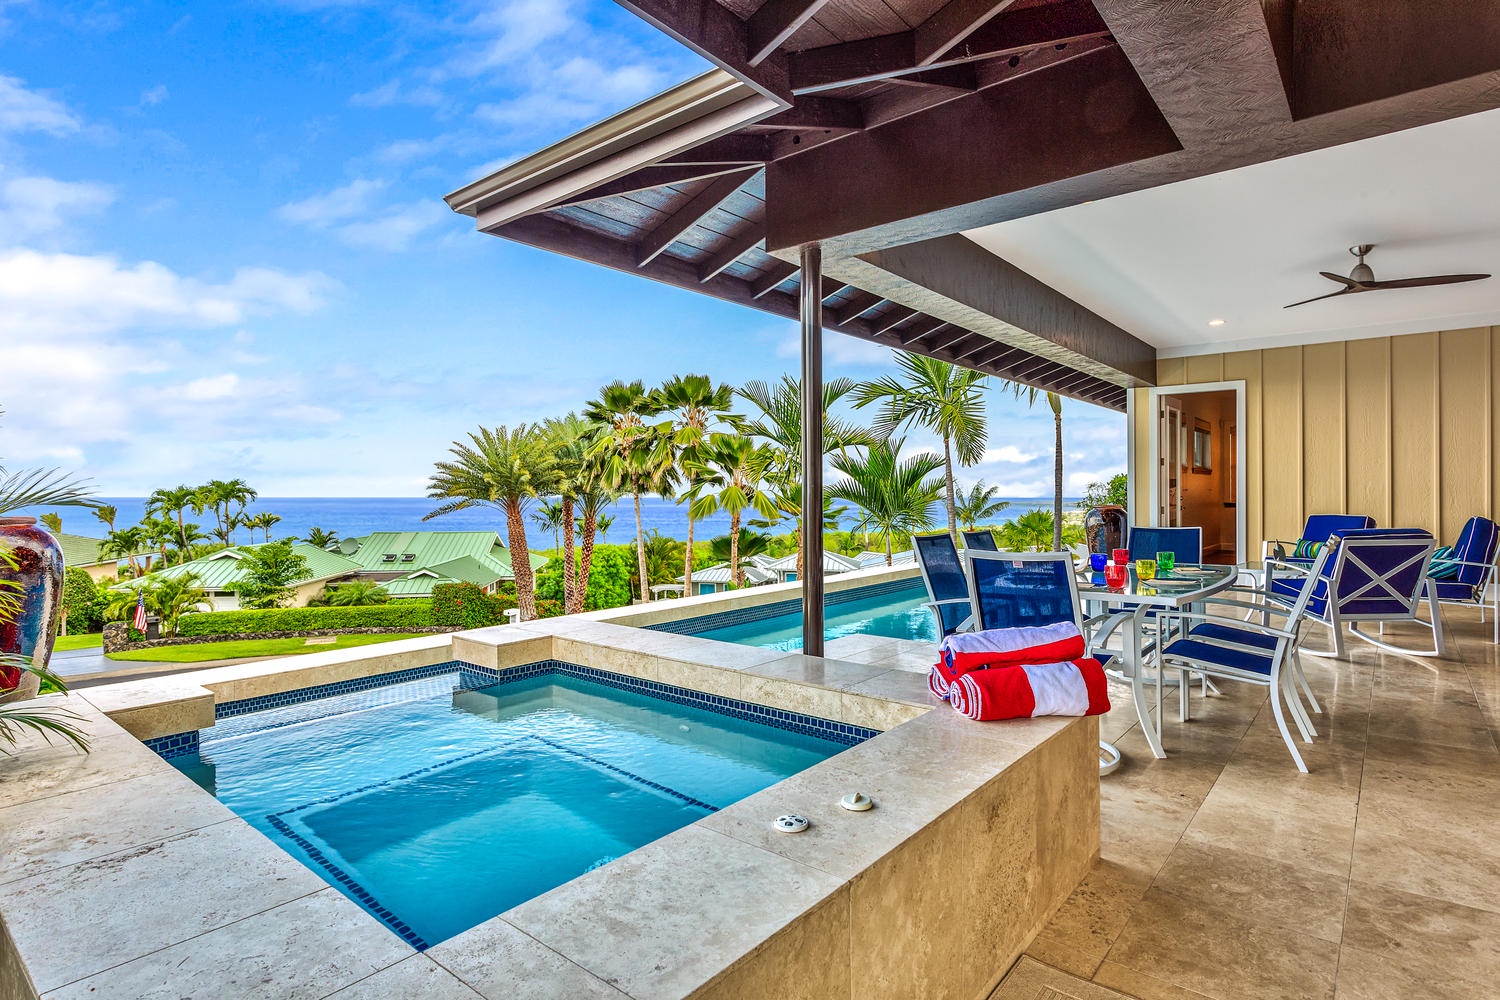 Kailua Kona Vacation Rentals, Ohana le'ale'a - Enjoy relaxing in the private pool and spa